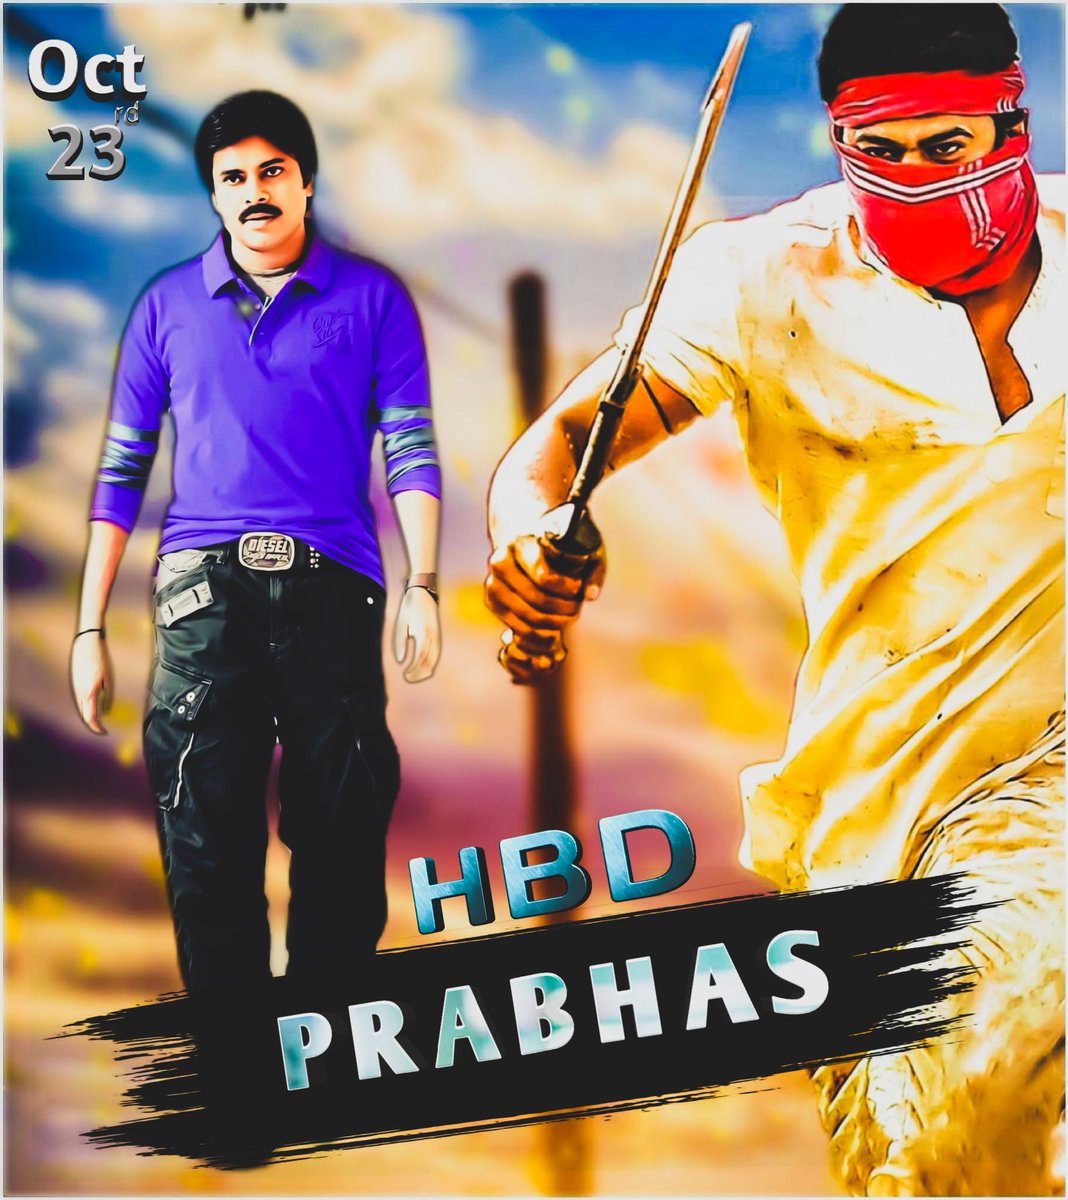 • HBD #YRS_PRABHAS 💝 !
• A Spl Gift Made by Me 💞 !
#HBDPrabhasFromPSPKFANS